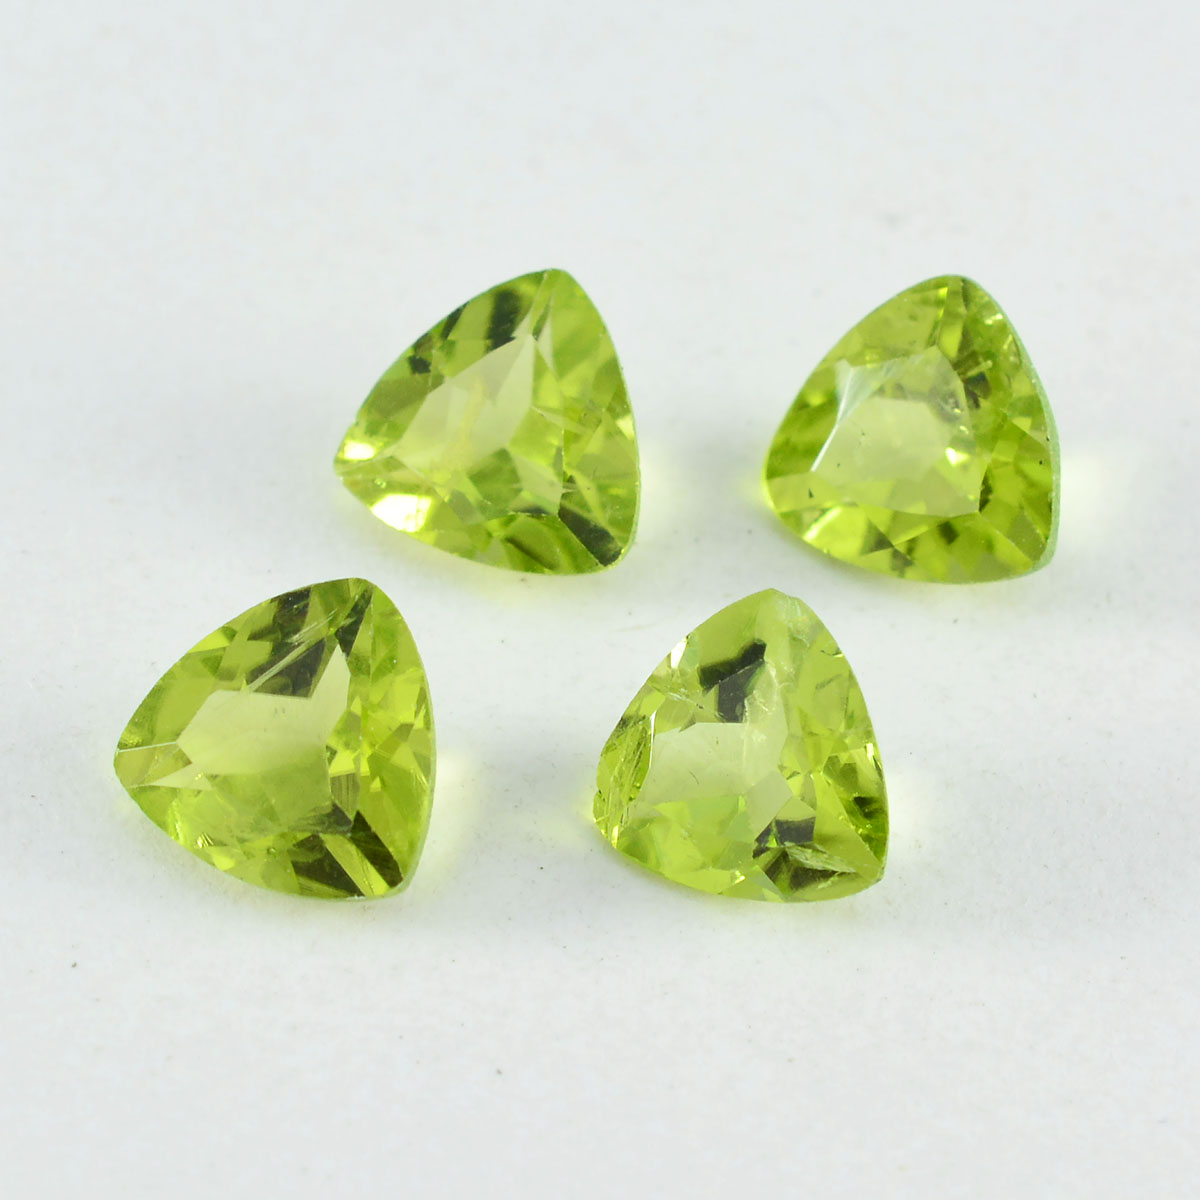 Riyogems 1PC Real Green Peridot Faceted 11x11 mm Trillion Shape AAA Quality Gems